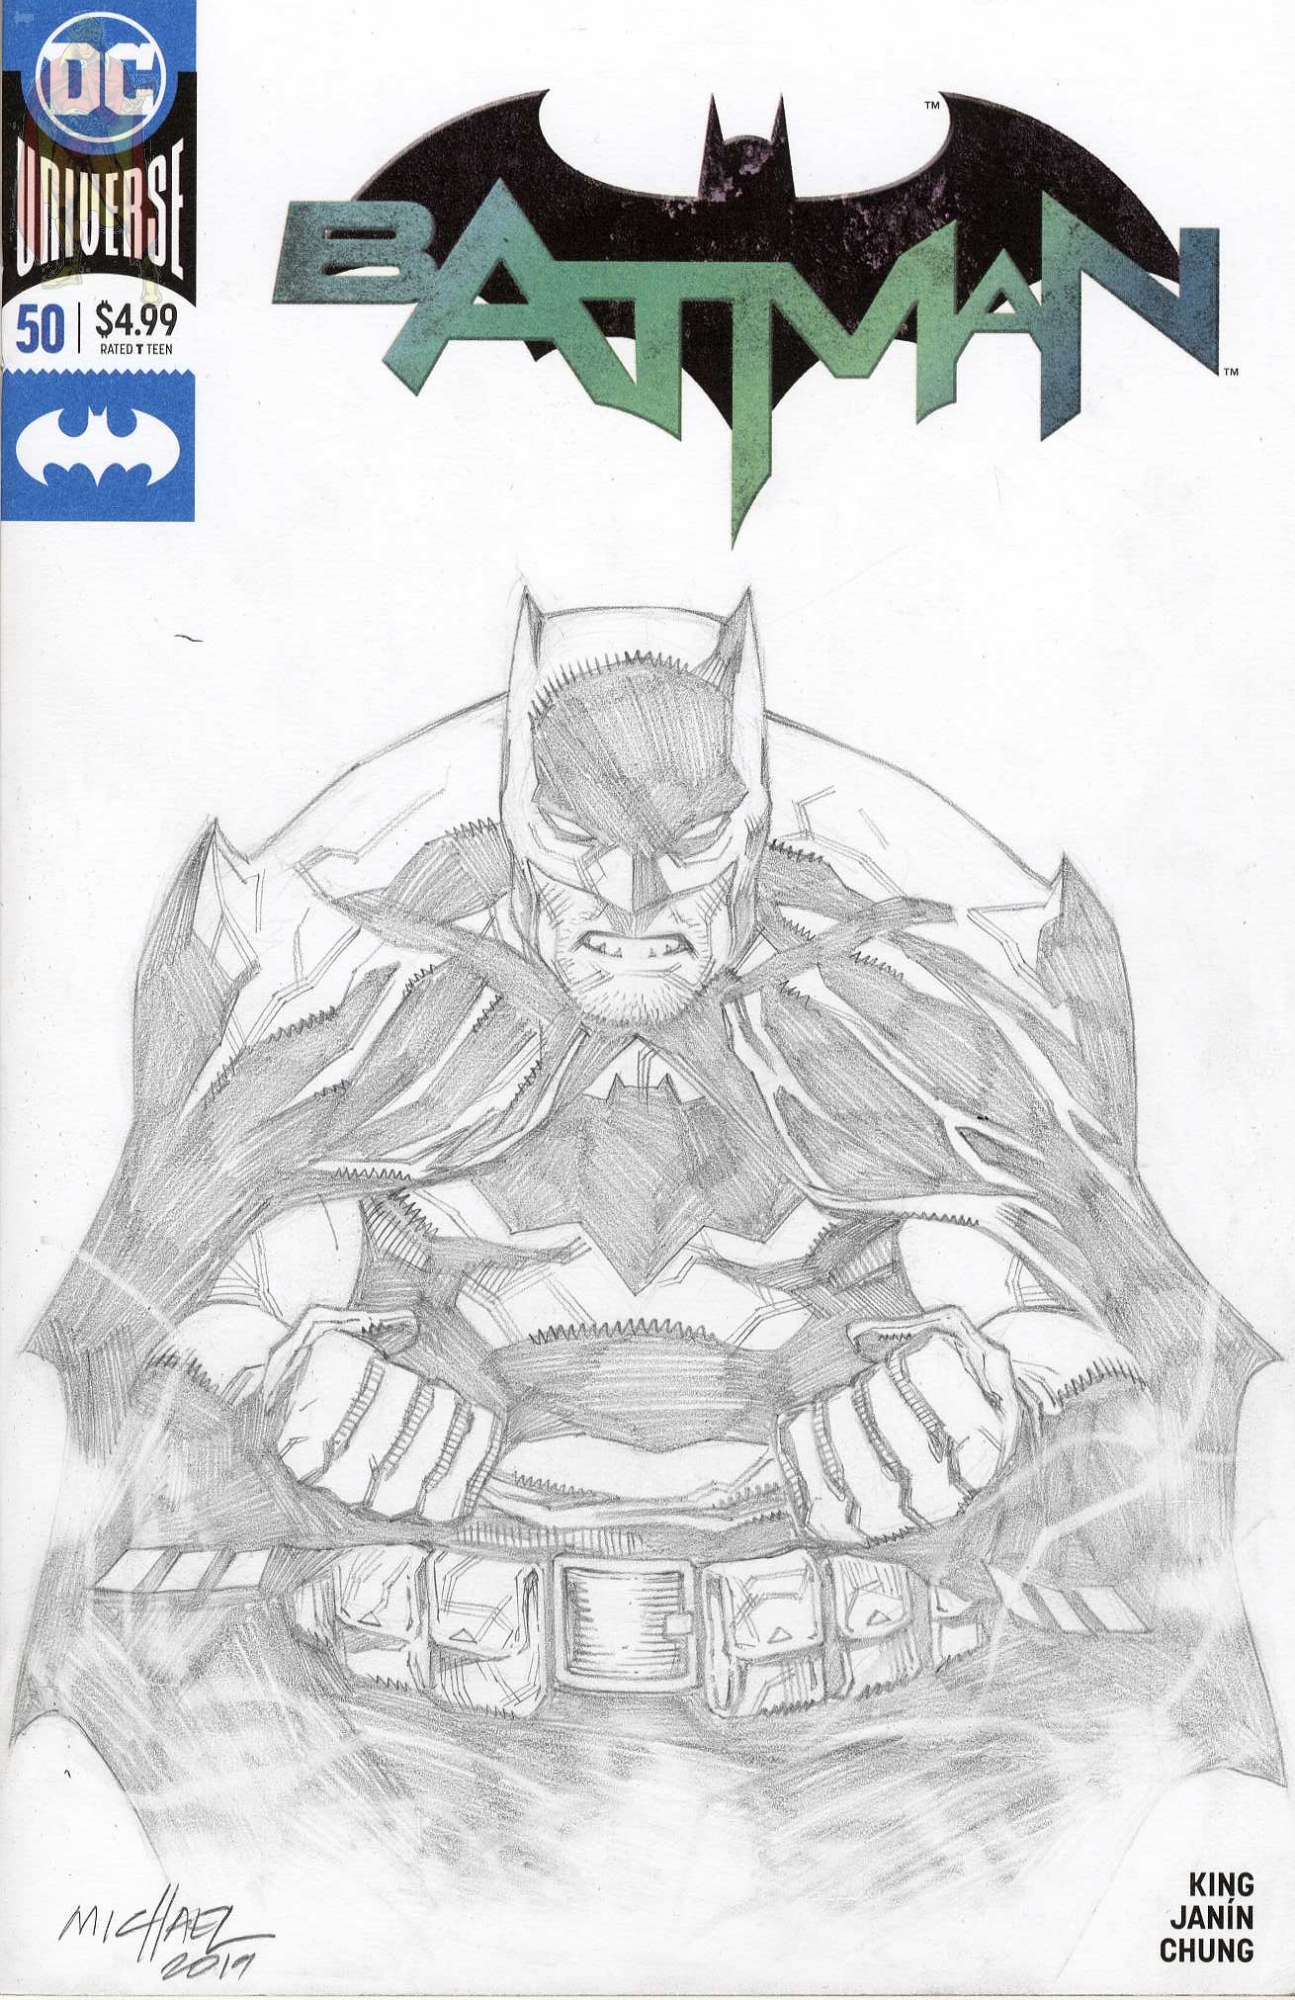 Comic Art Shop :: Kirk Dilbeck (3-Wishes and Patron-of-art) 's Comic Art  Shop :: Batman Sketch cover by Heubert Khan Michael :: The largest  selection of Original Comic Art For Sale On